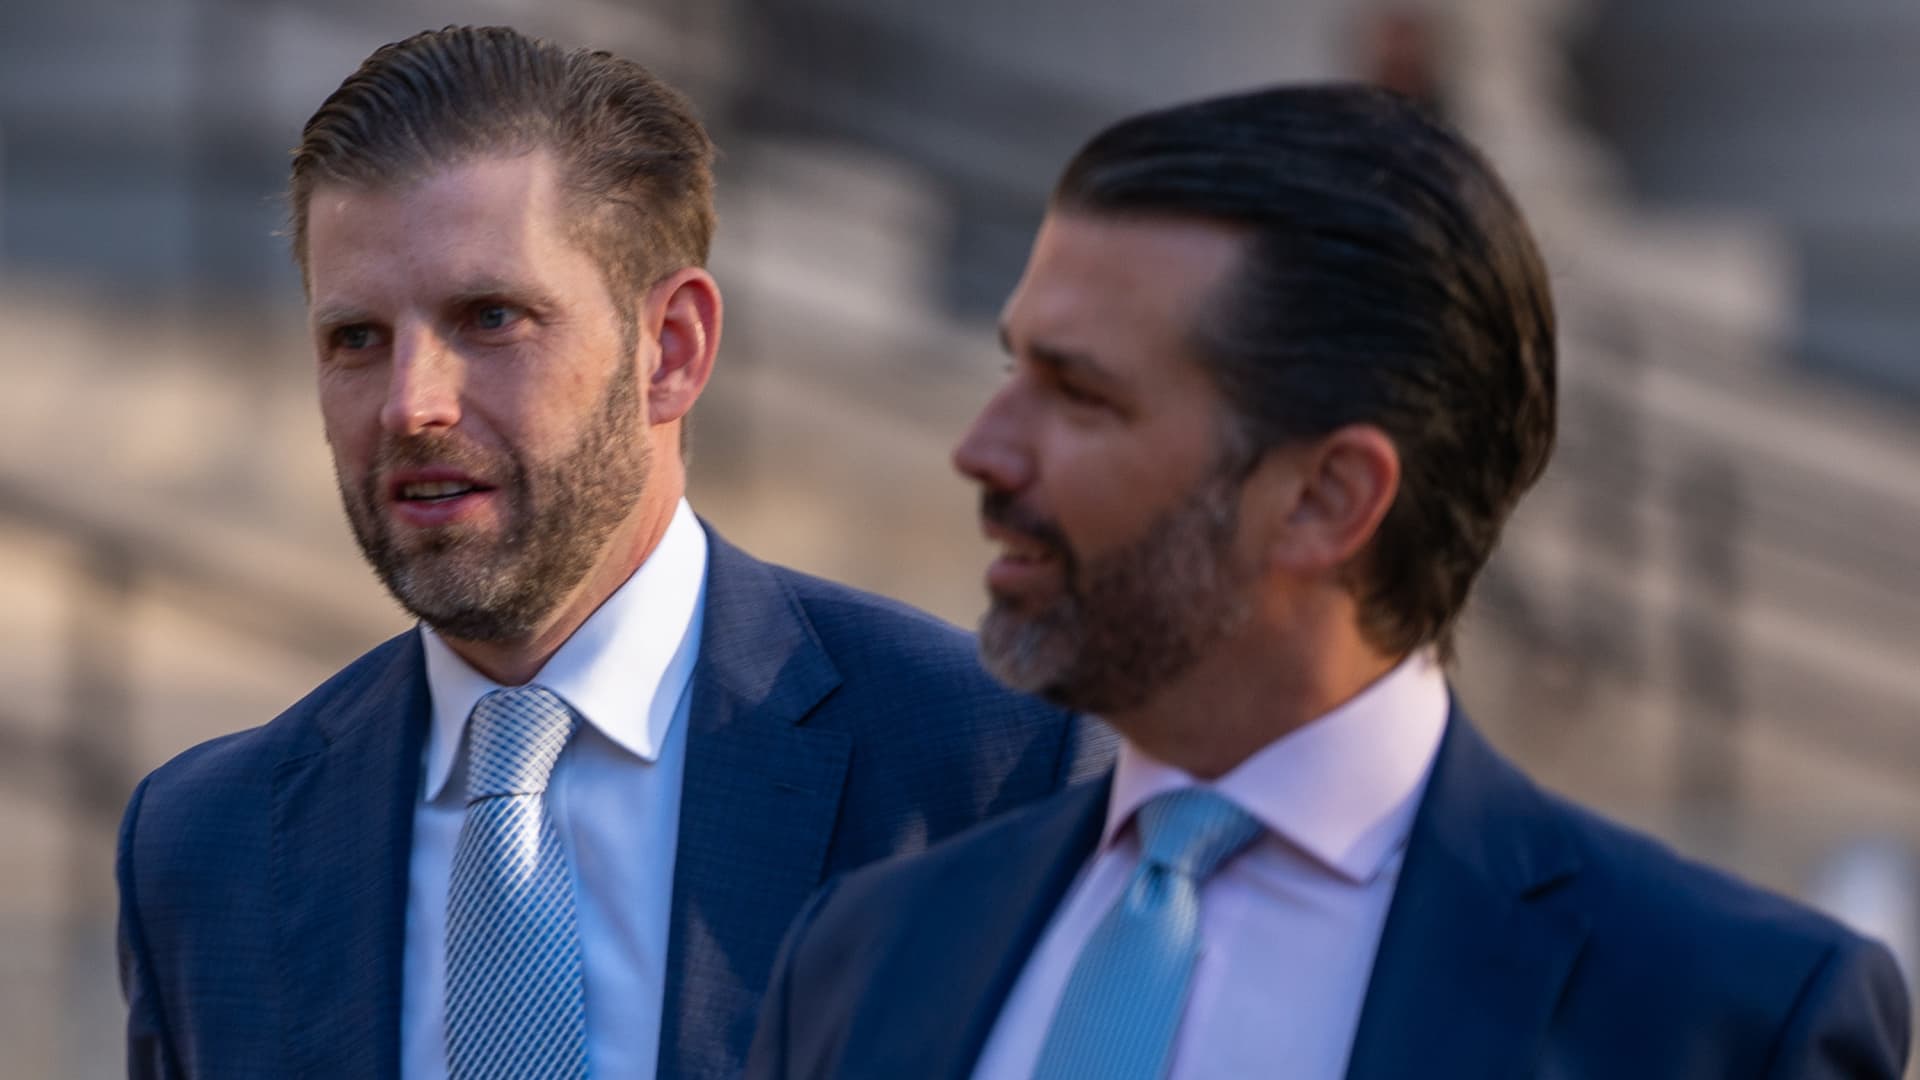 Donald Trump Jr. and his brother Eric Trump arrive at New York Supreme Court for former President Donald Trump's civil fraud trial in New York City on Nov. 2, 2023.